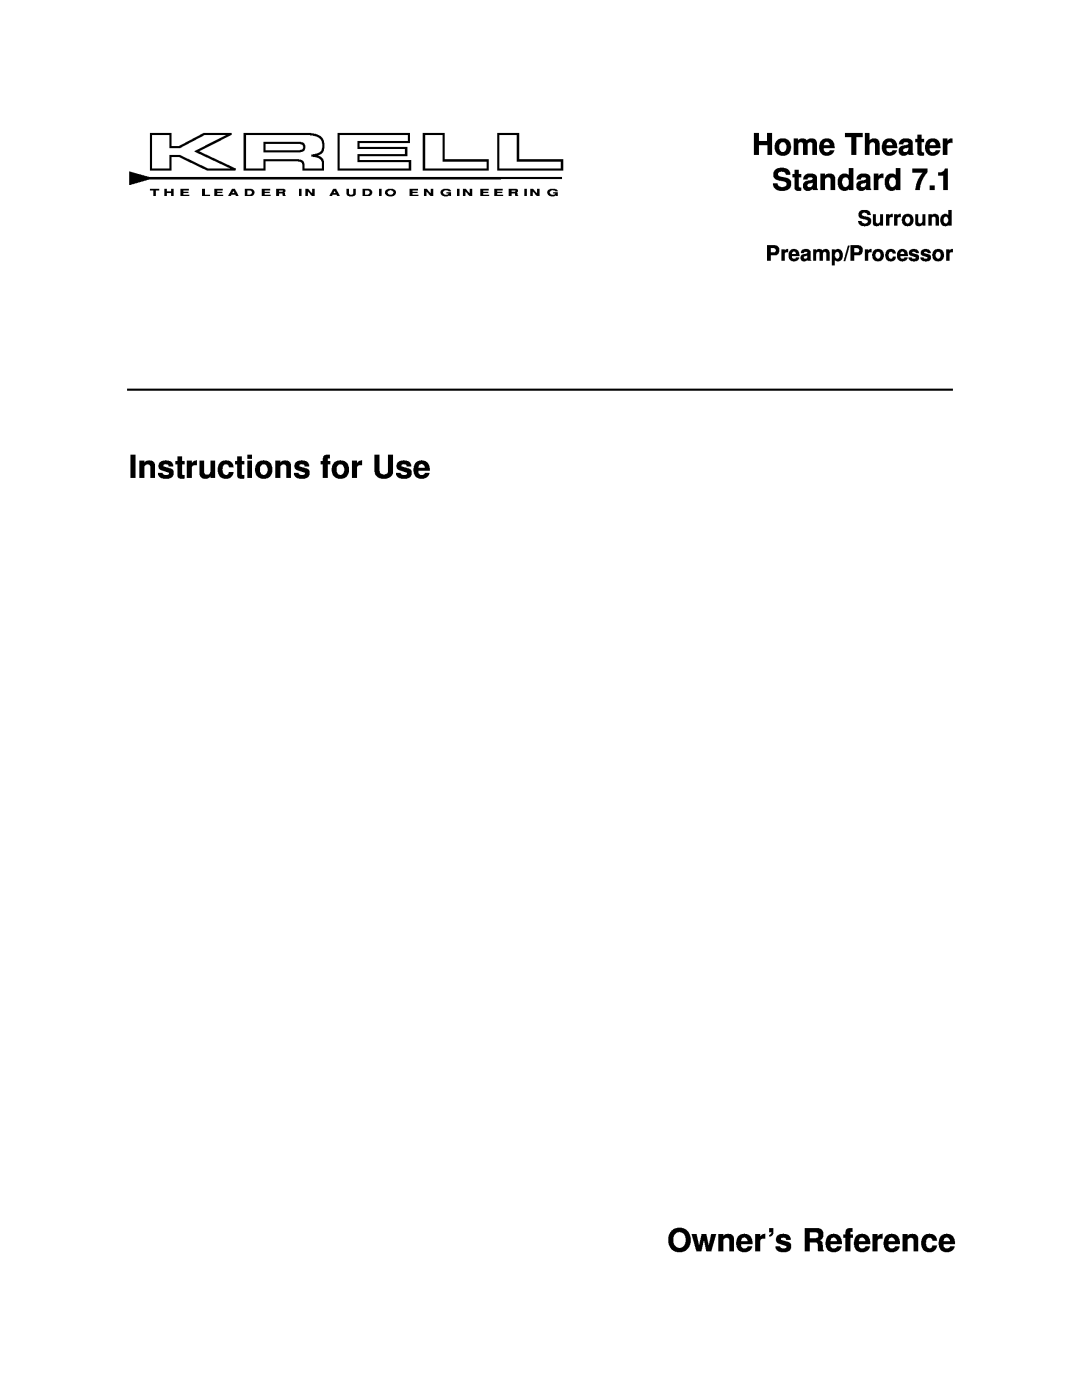 Krell Industries 7.1 manual Instructions for Use, Owner’s Reference, Home Theater Standard, Surround Preamp/Processor 